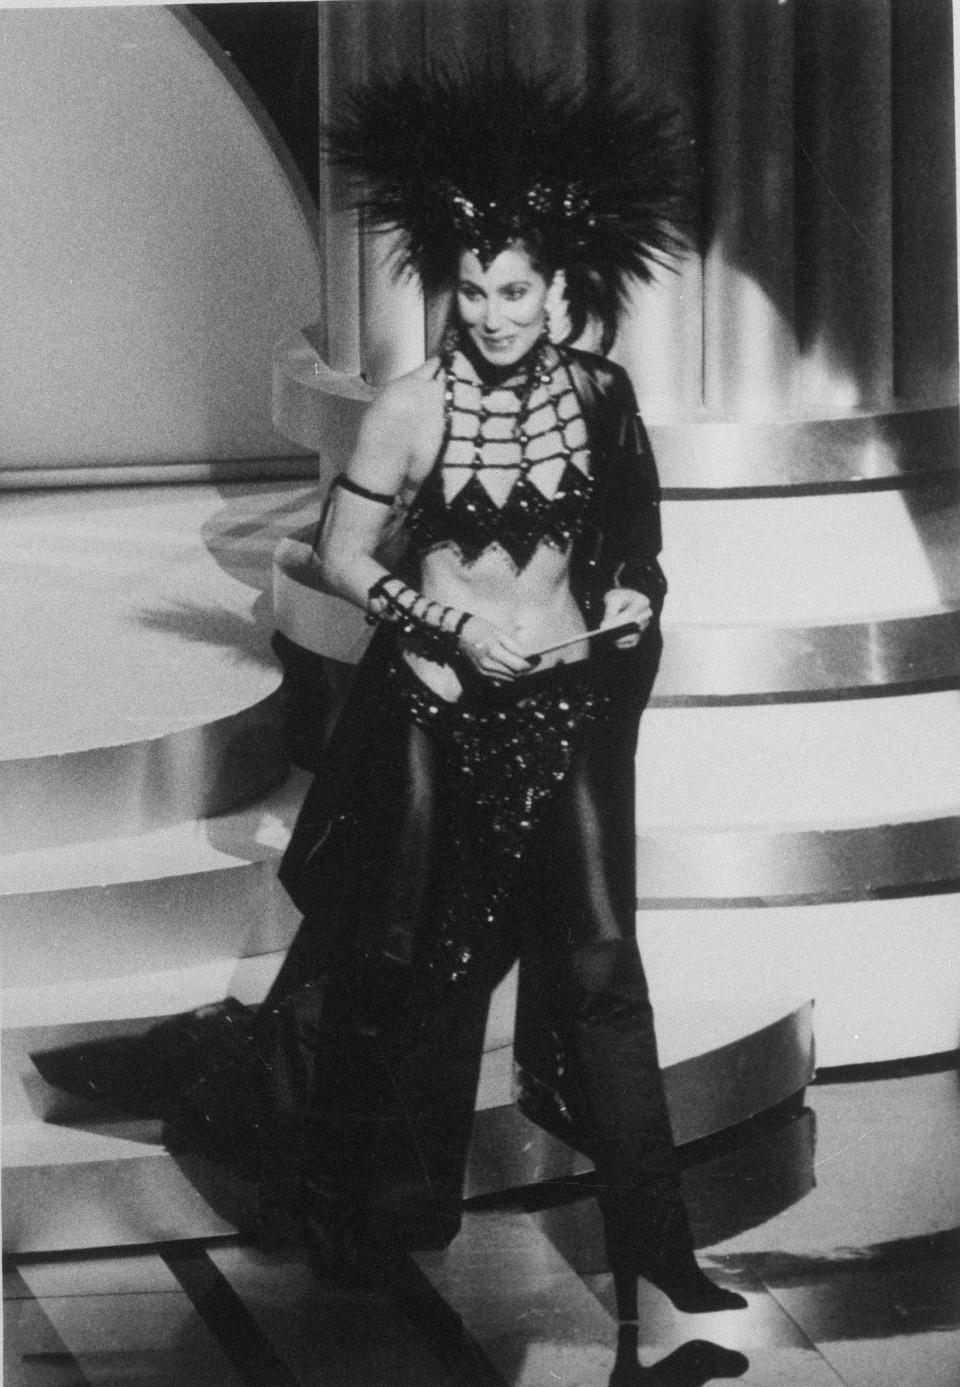 Cher walks on stage at the Dorothy Chandler Pavilion in Los Angeles for the 58th annual Academy Awards ceremony, March 25, 1986. - Credit: AP Photo/Reed Saxon